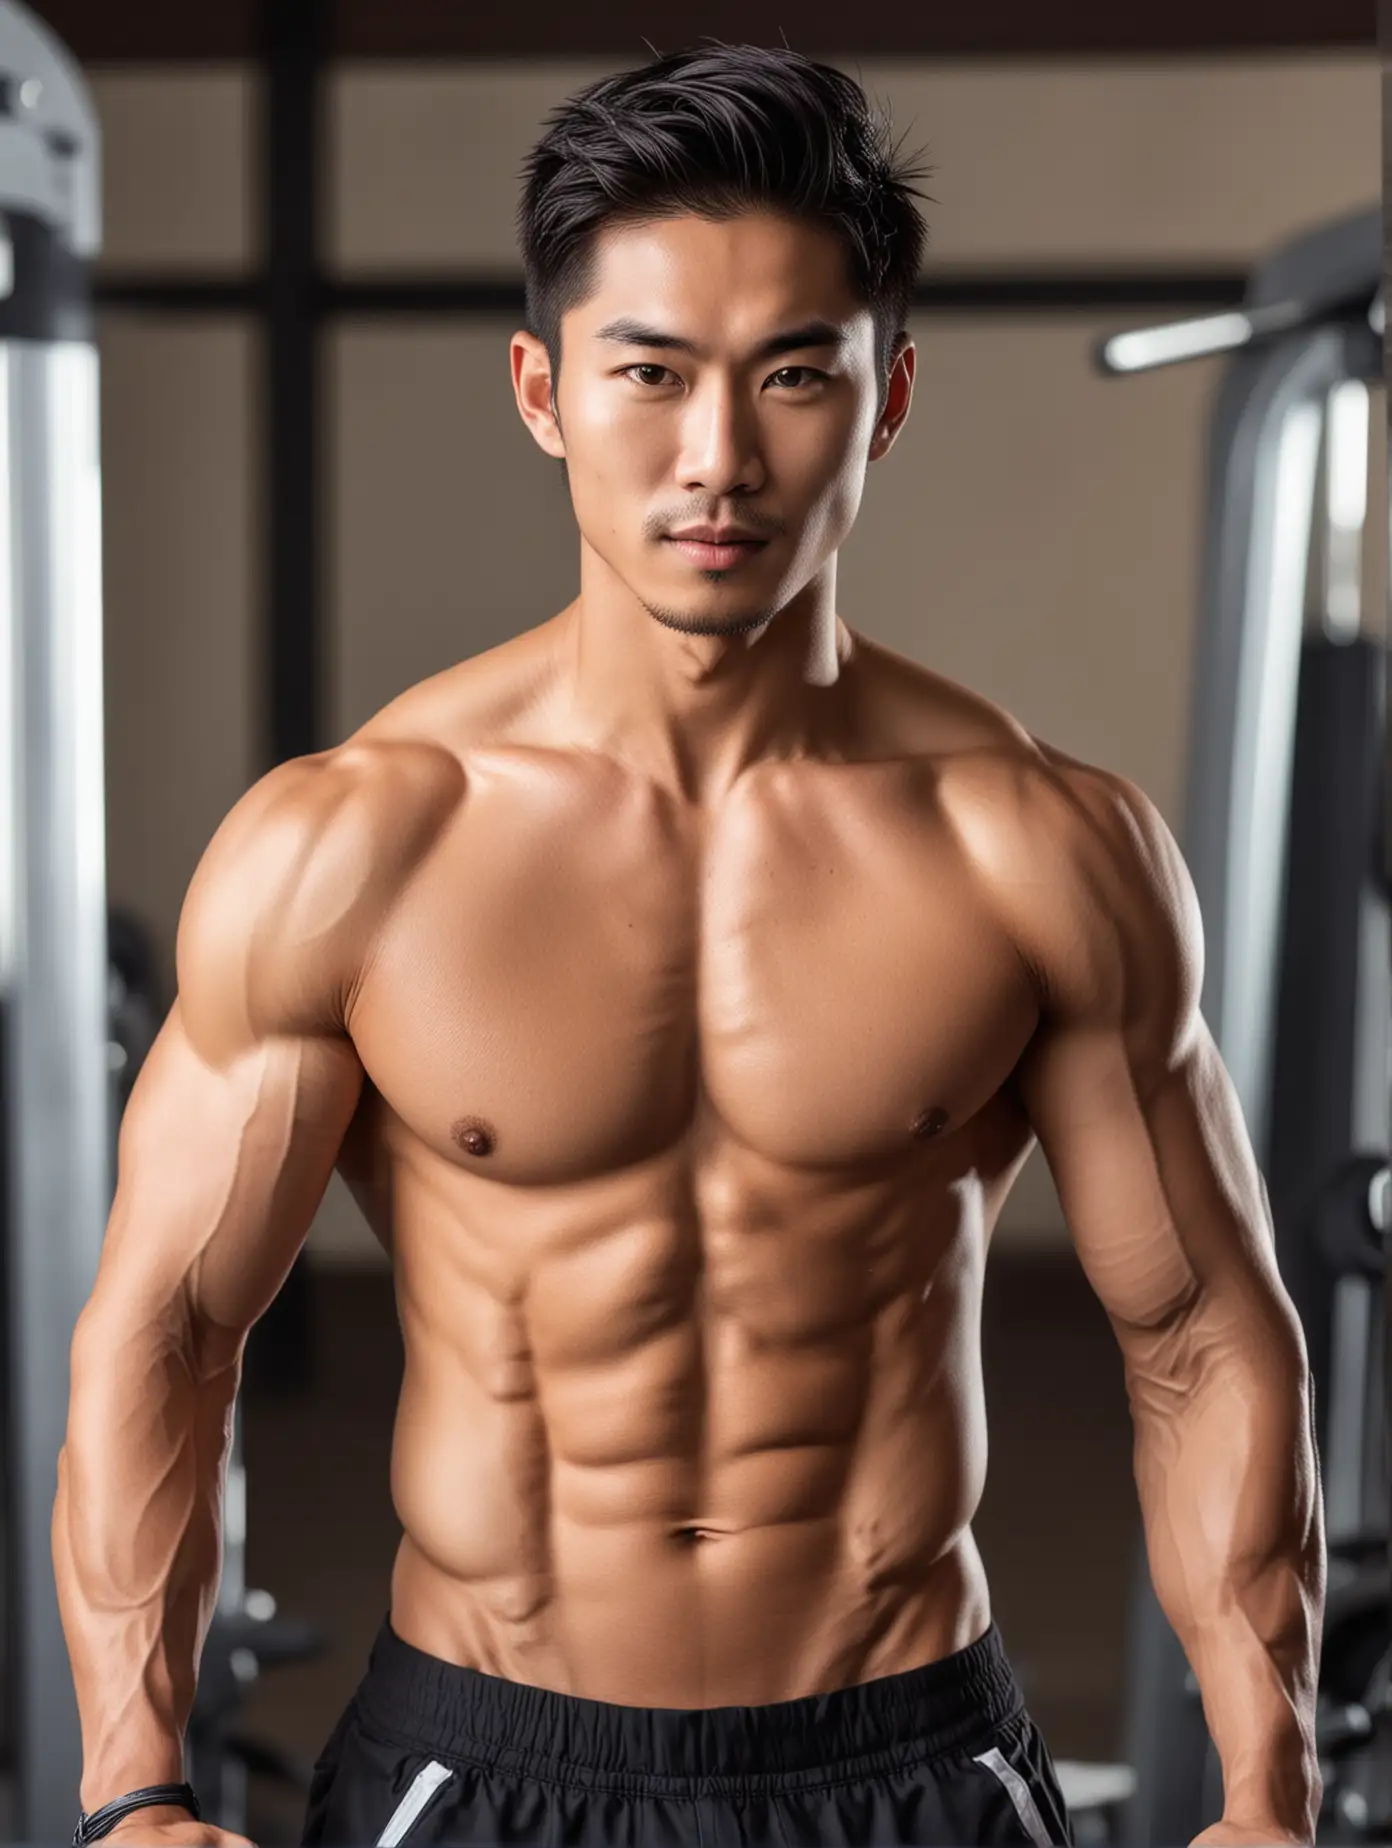 Attractive Asian Male Fitness Model in Gym Setting with Camera Focus